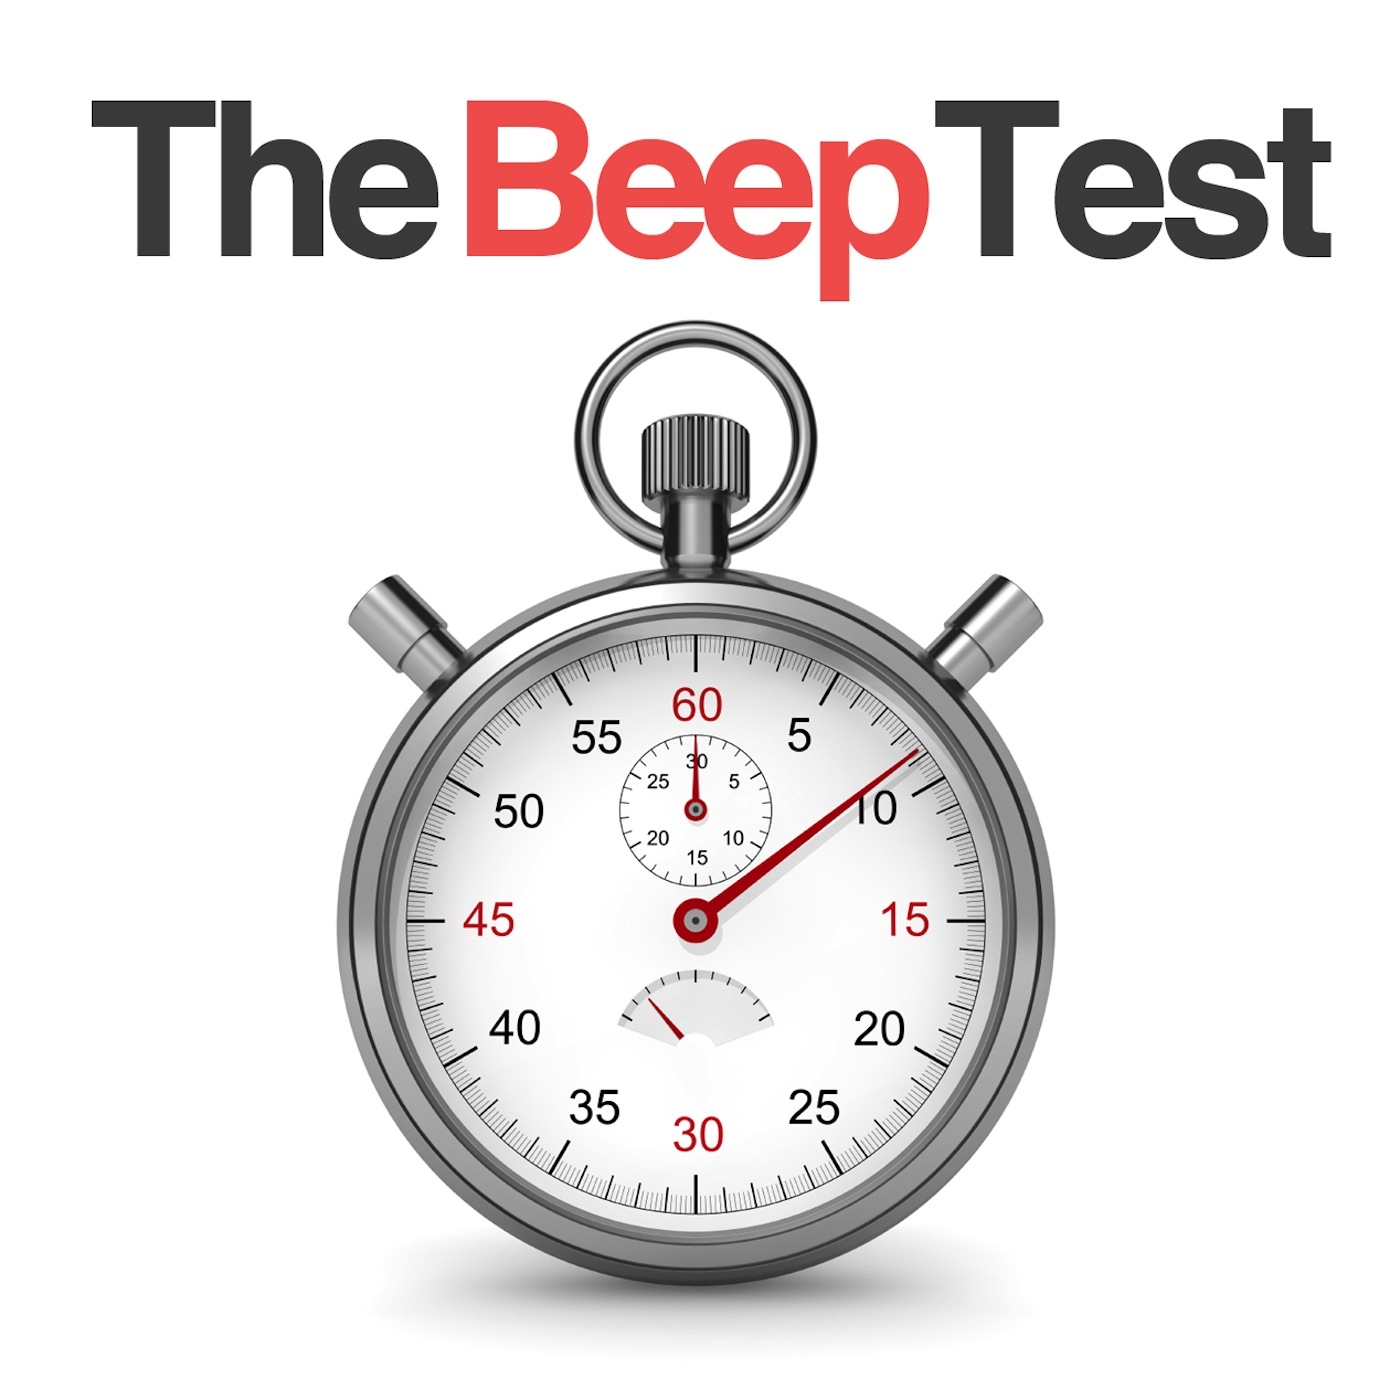 The Beep Test: 20 Metre (Complete Test)